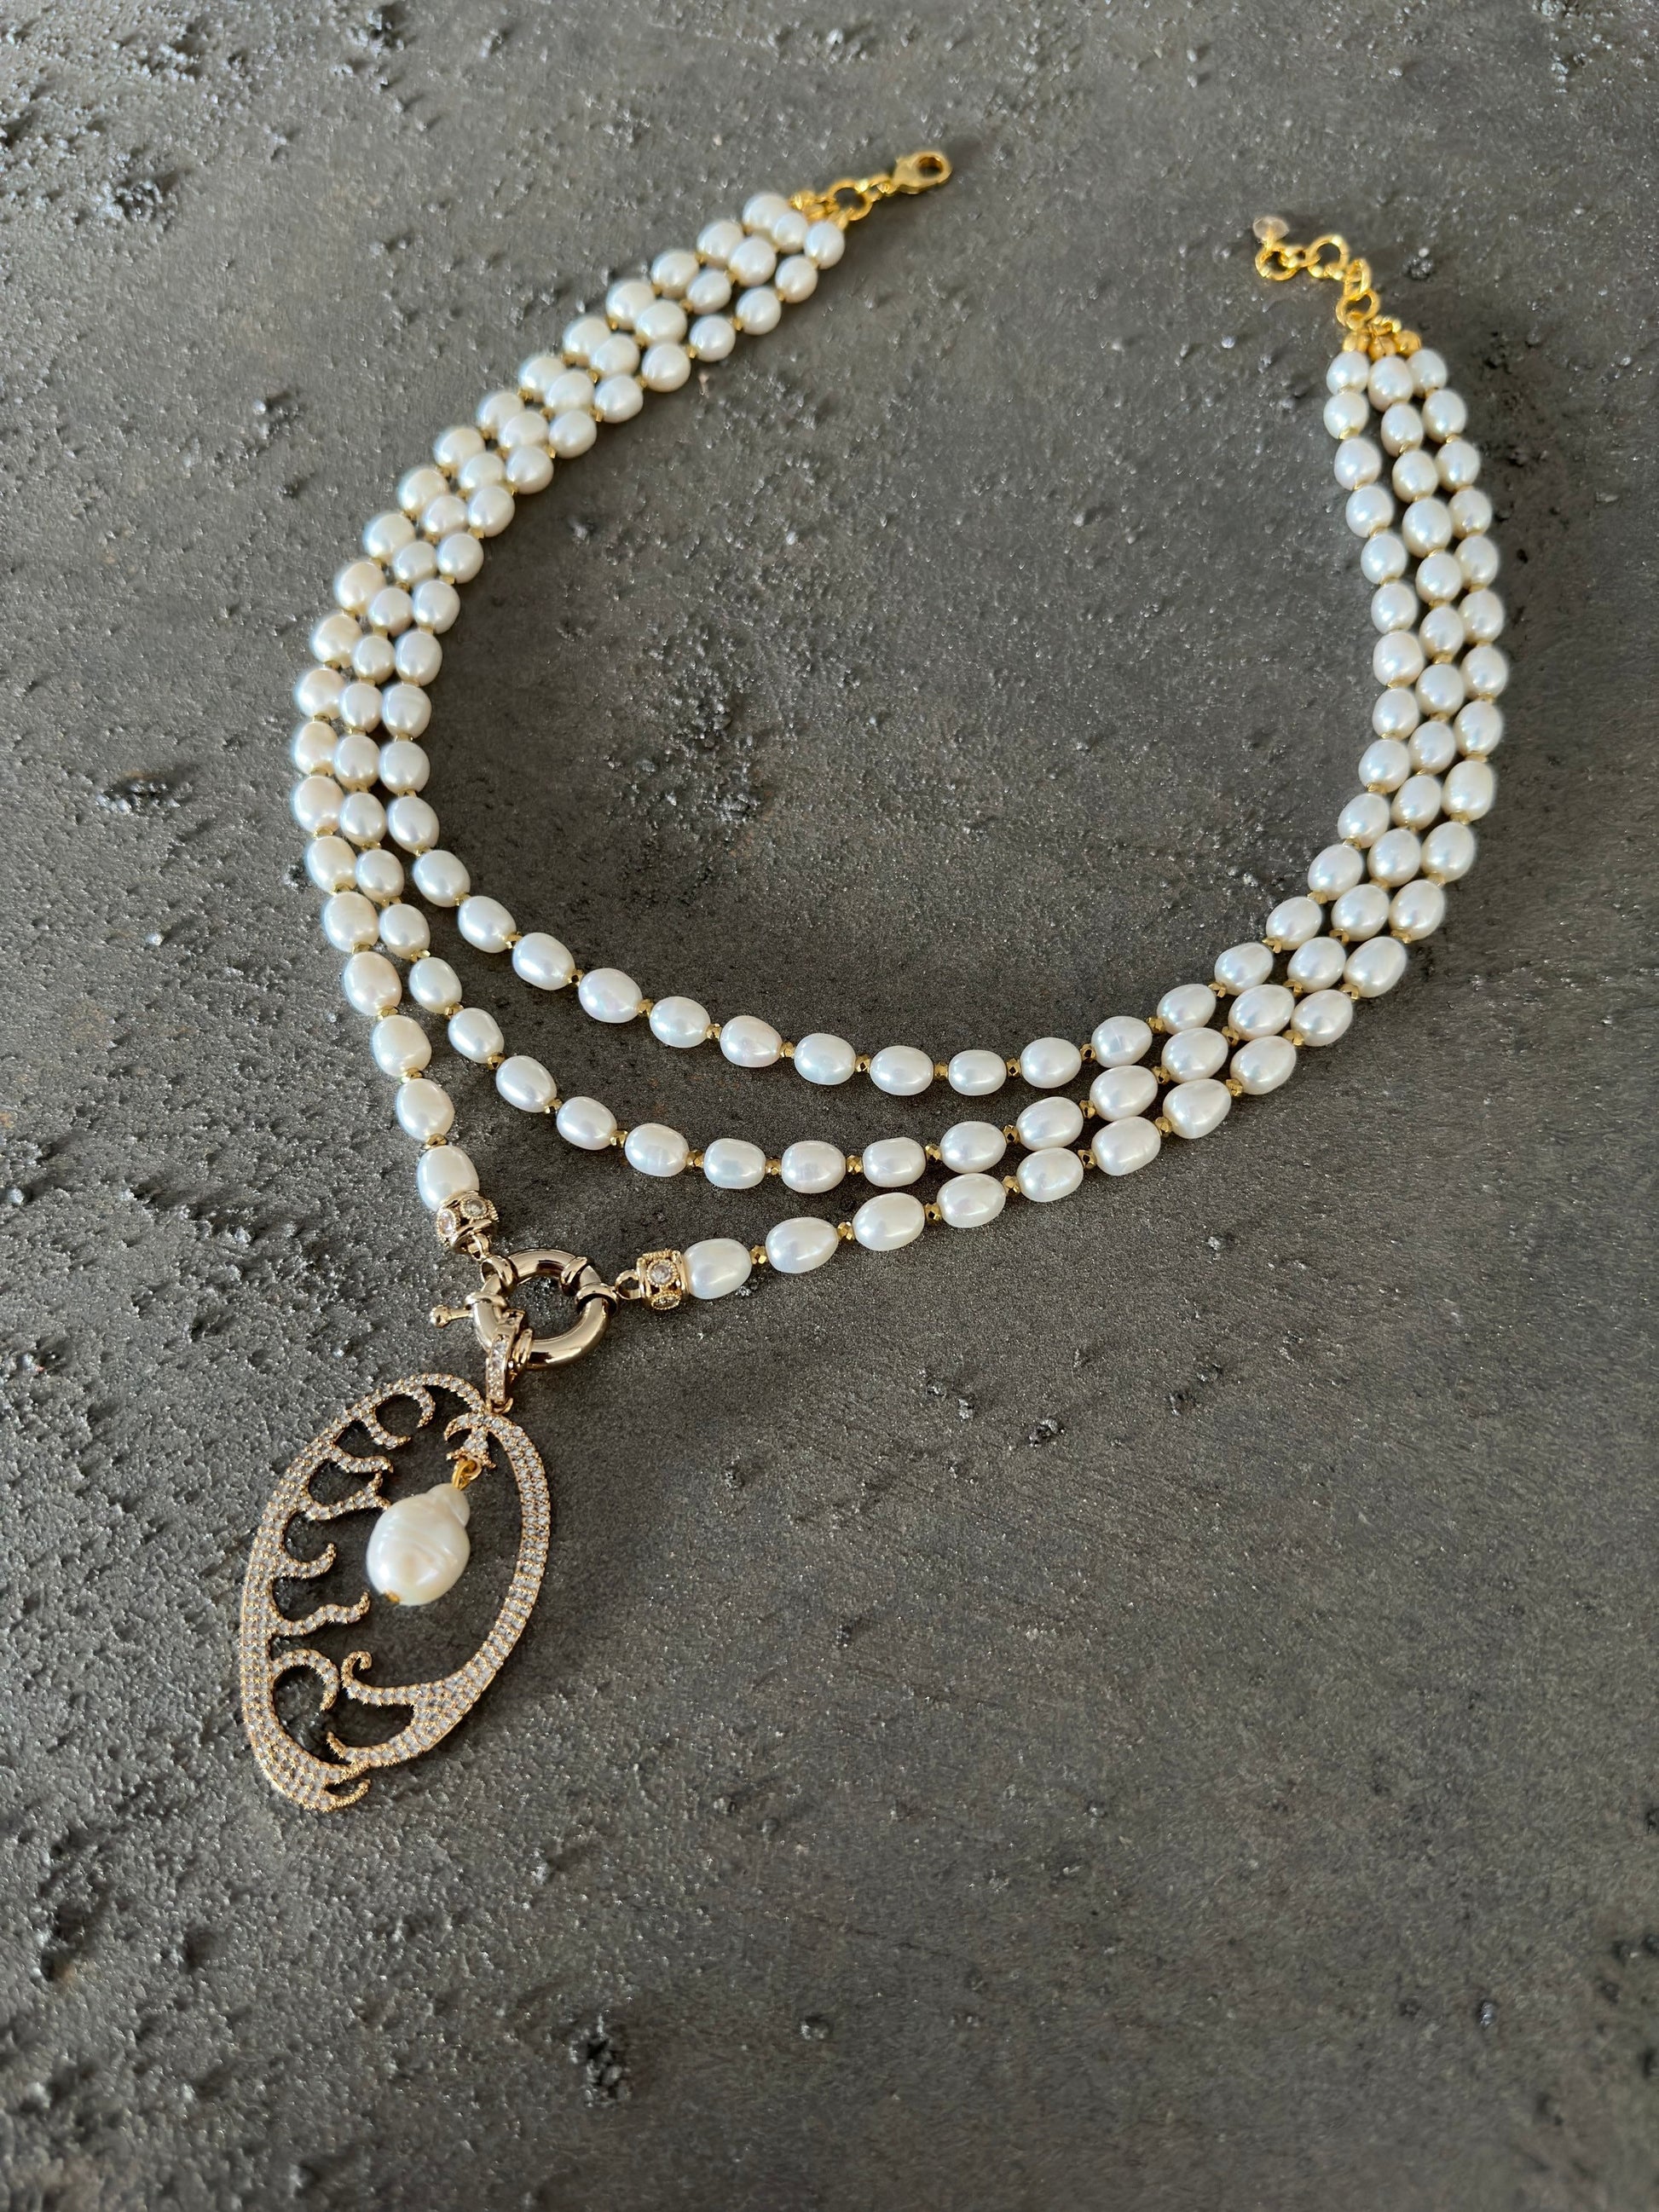 Pearl Necklace, Statement Necklace, Handmade Jewelry for Women, Wife Birthday Gift, Bridal Pearl Jewelry